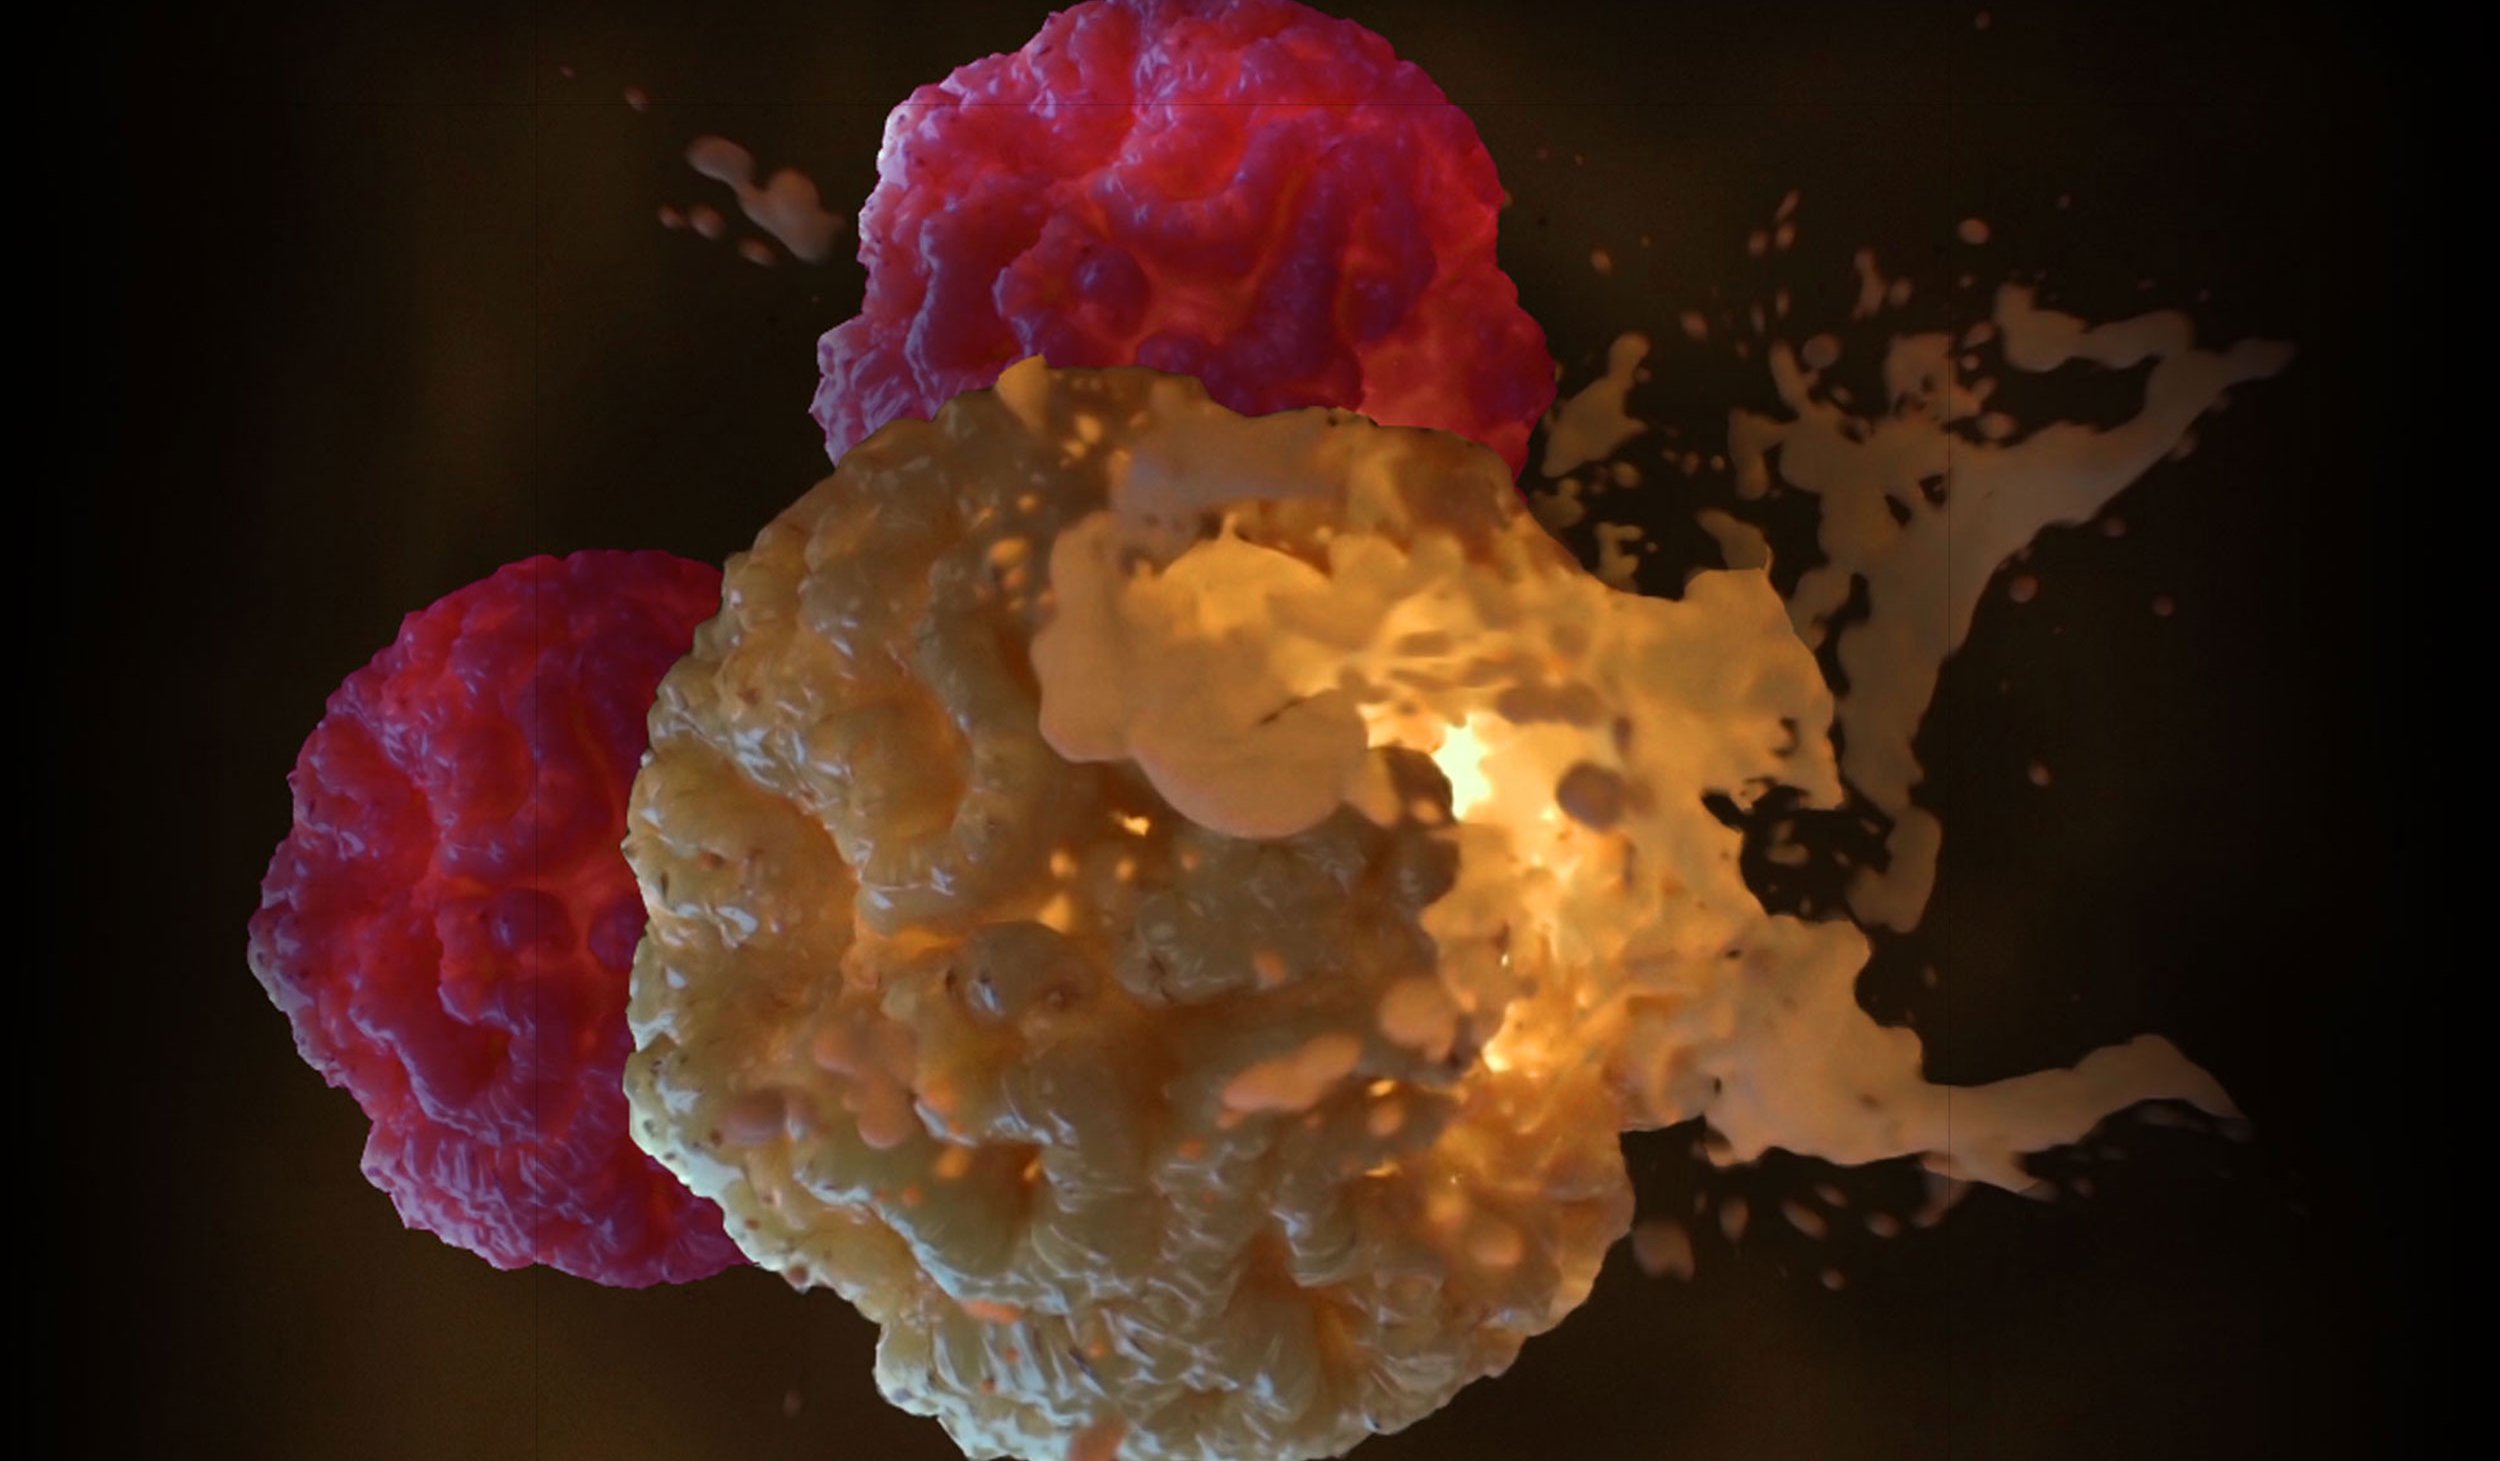 Immuno-oncology applications